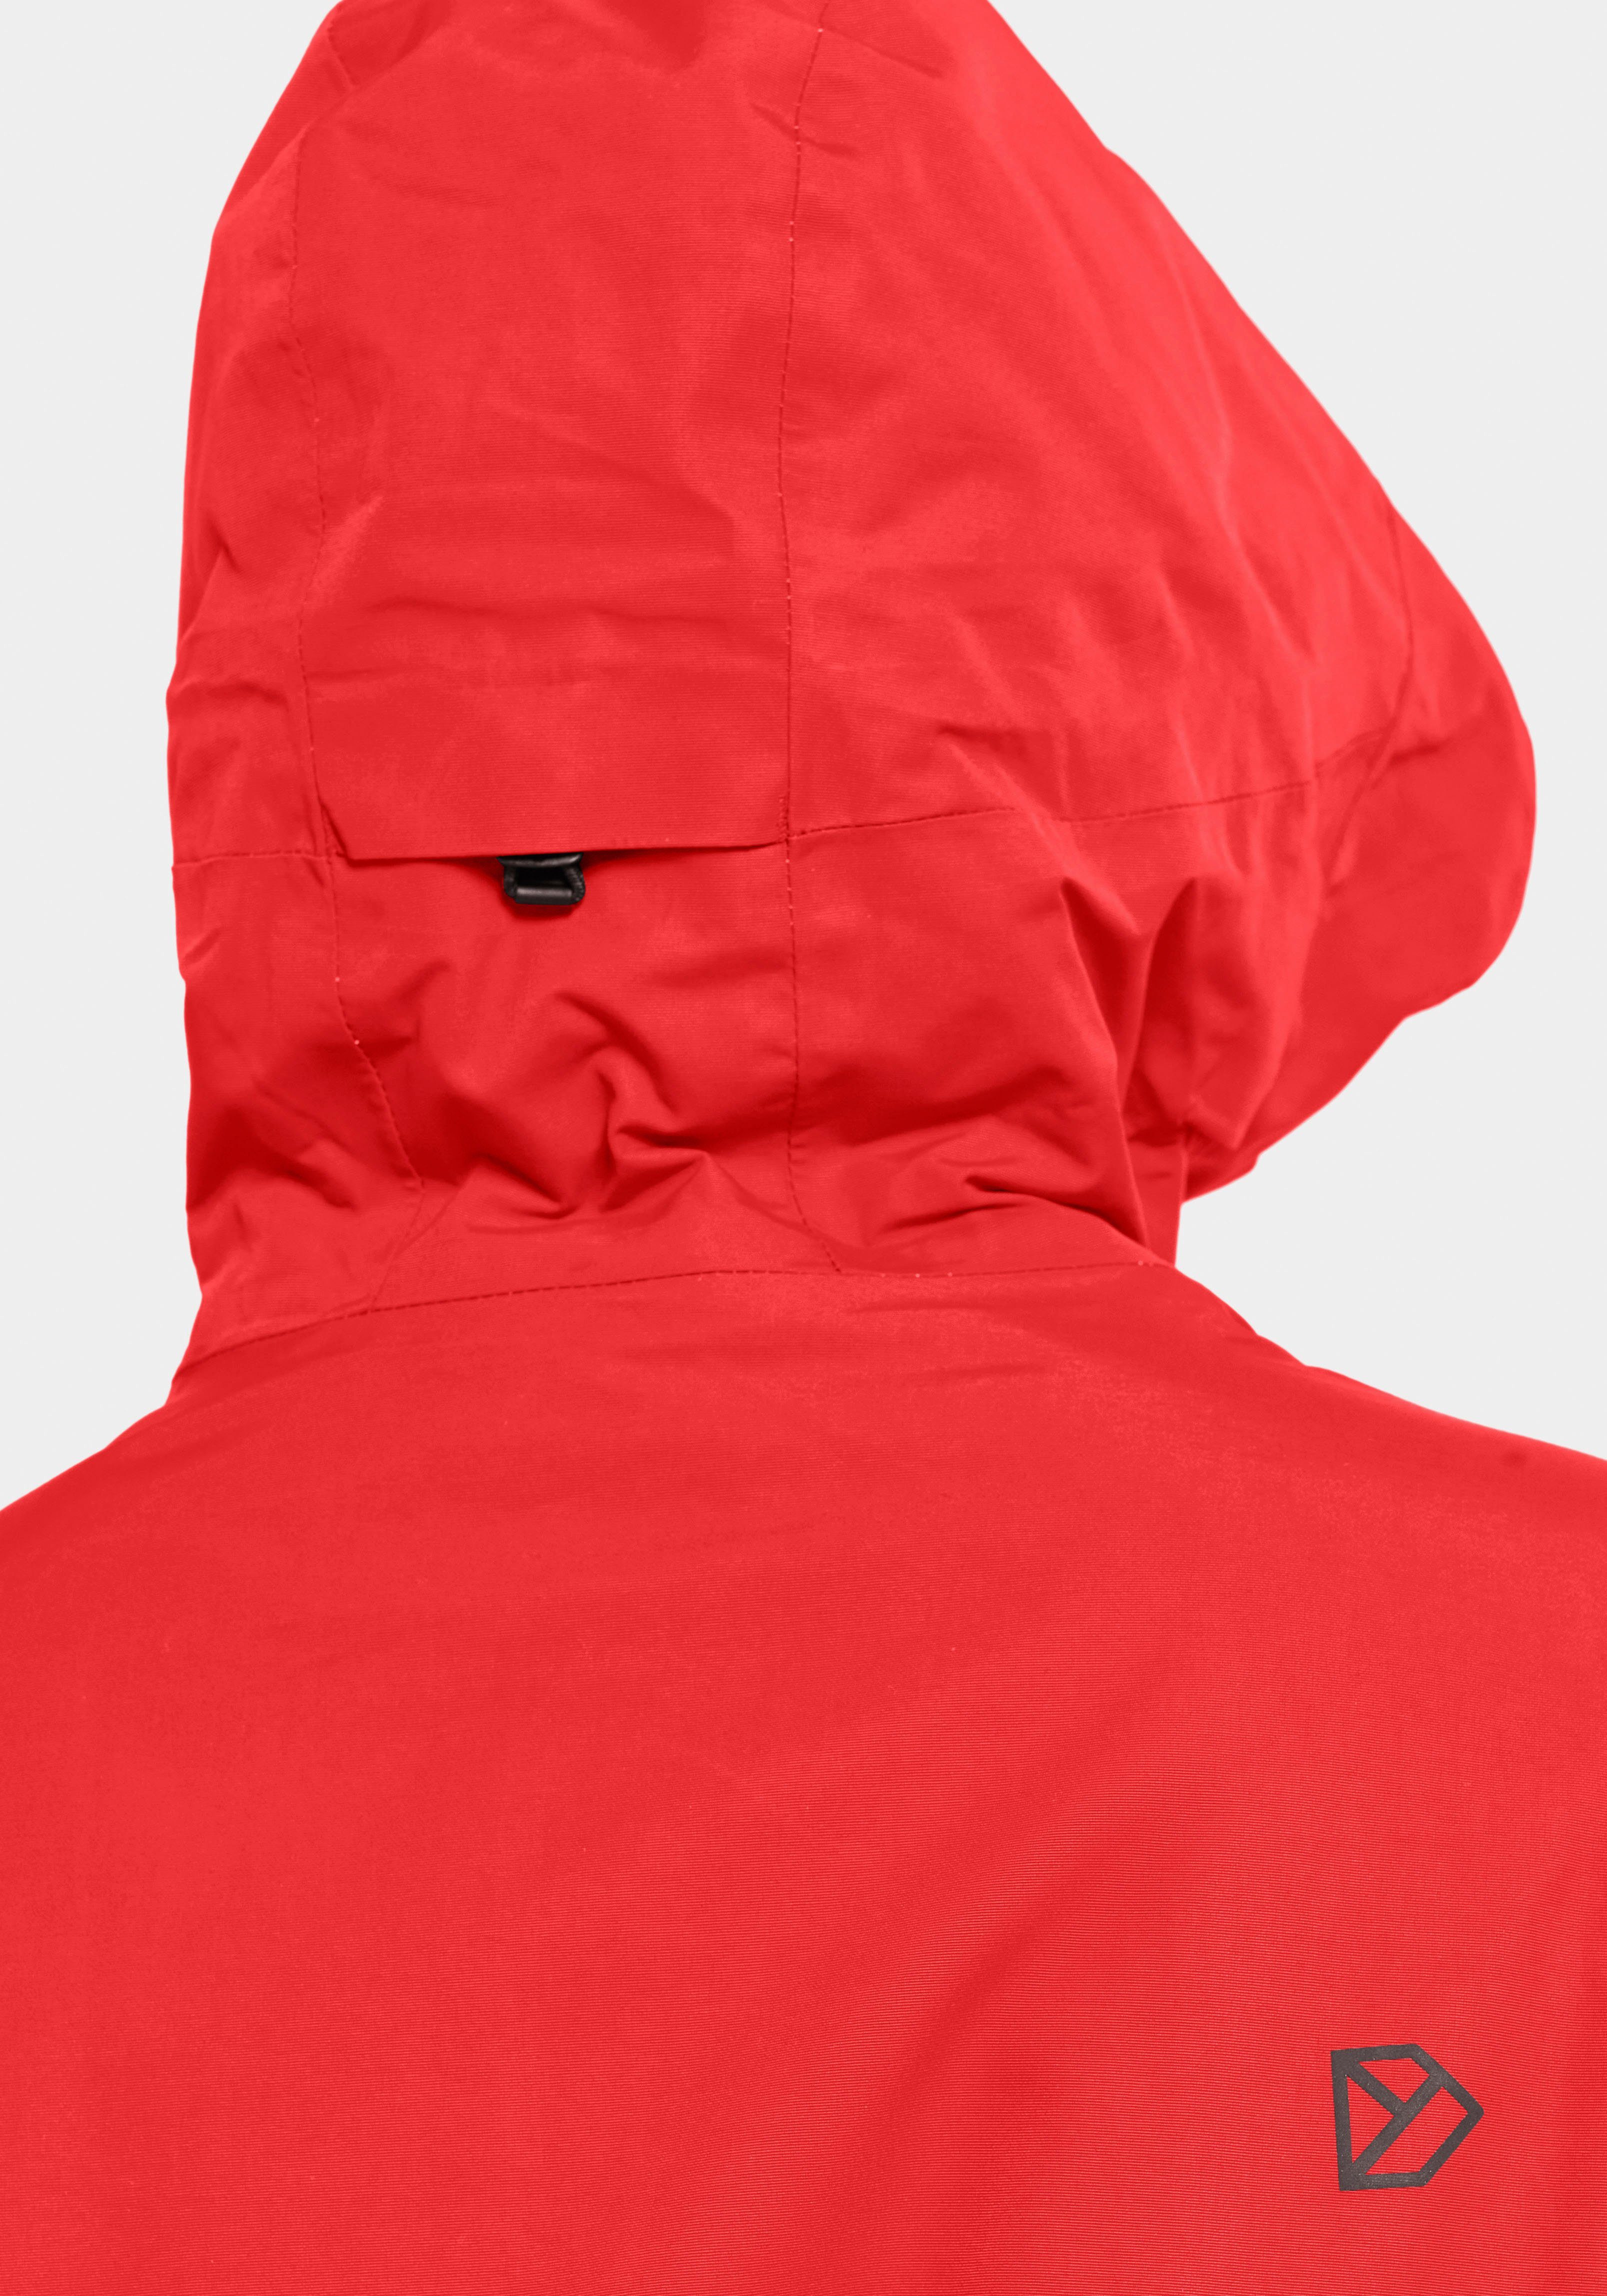 Didriksons pomme Parka red